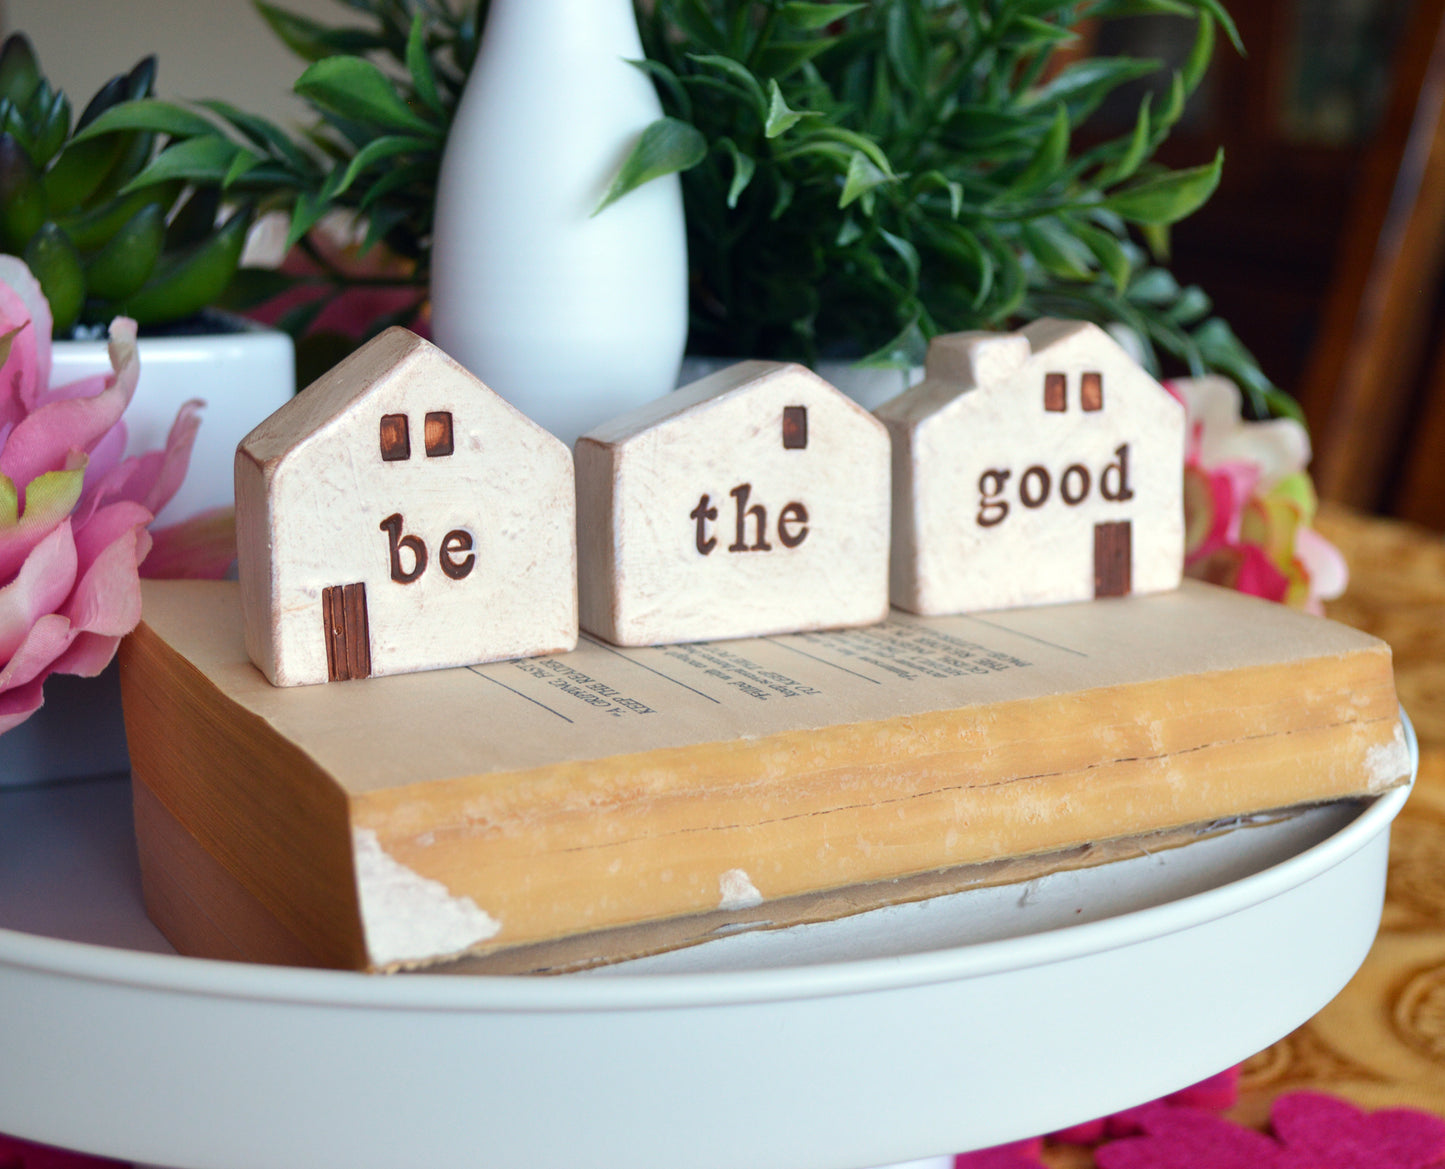 Be the Good houses